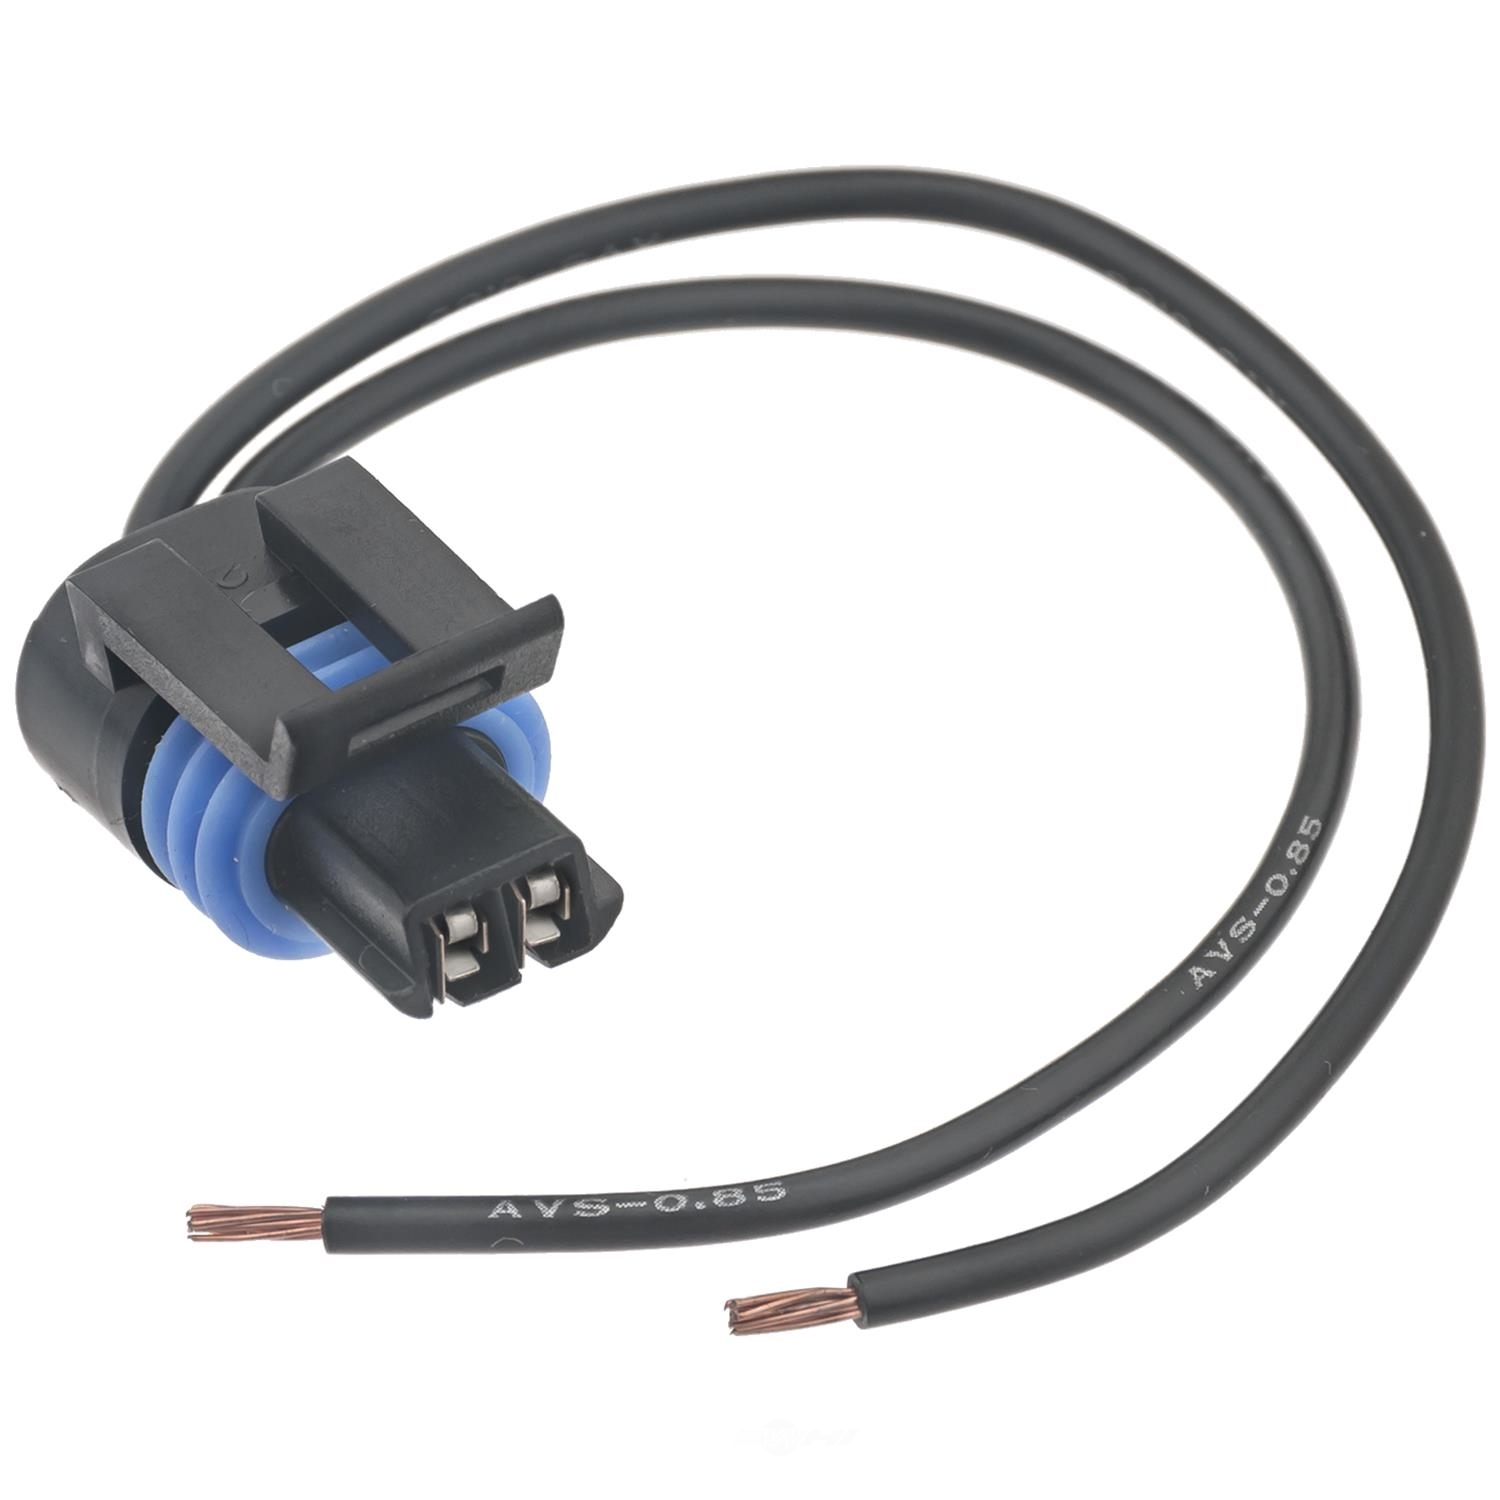 HANDY PACK - Automatic Transmission Fluid Temperature Sensor Connector - HDY HP3840